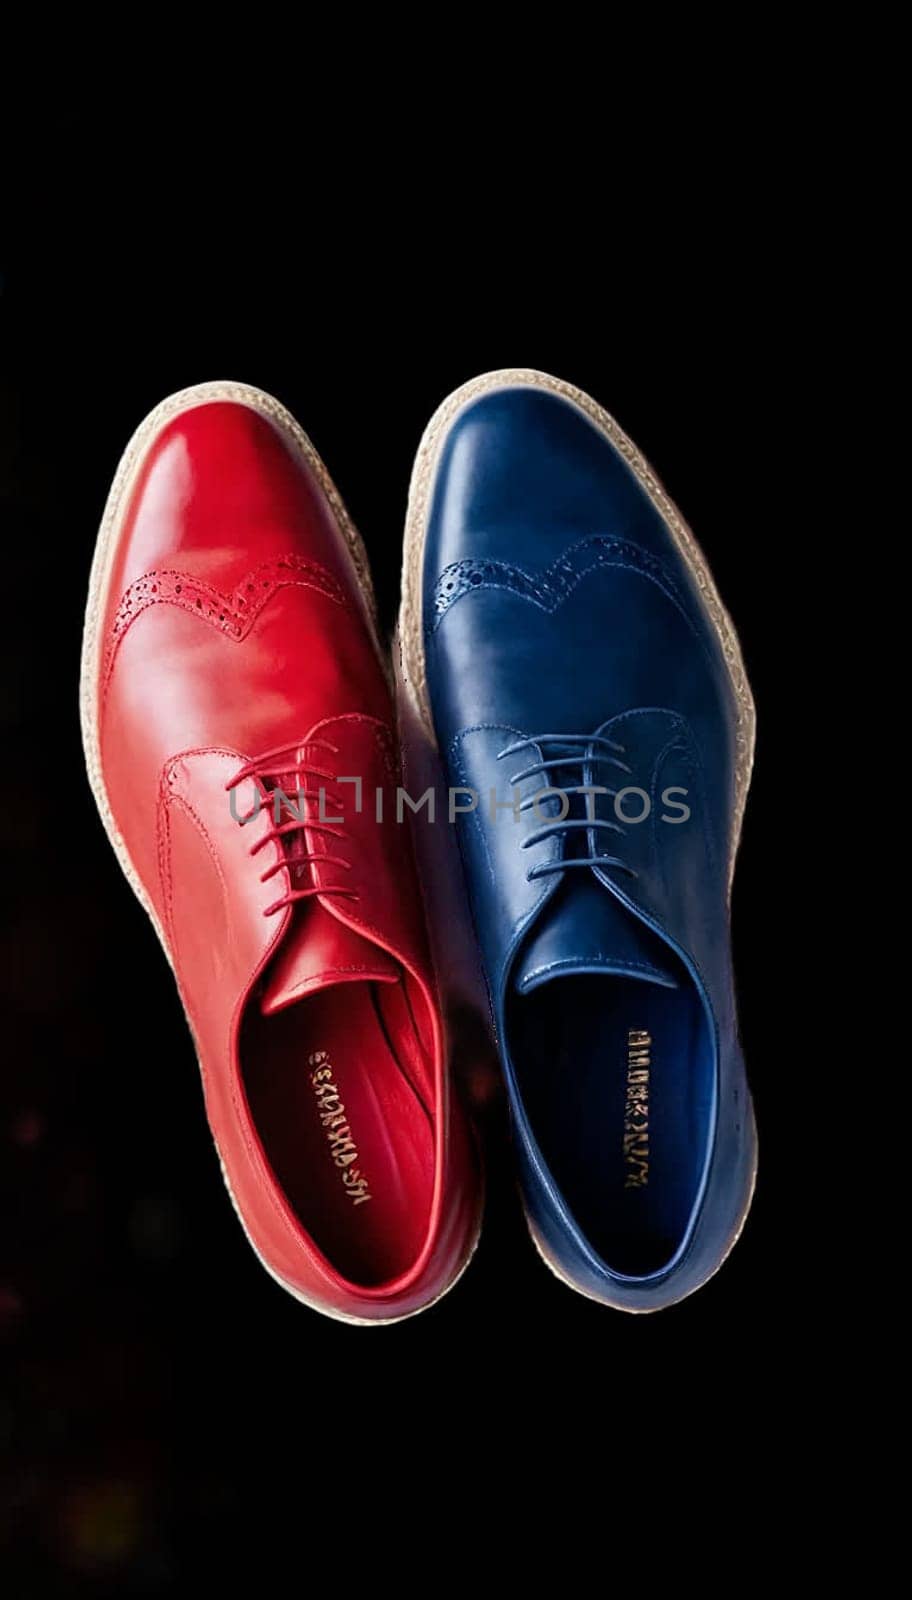 Pair of men's shoes red and blue color transparent background by Севостьянов